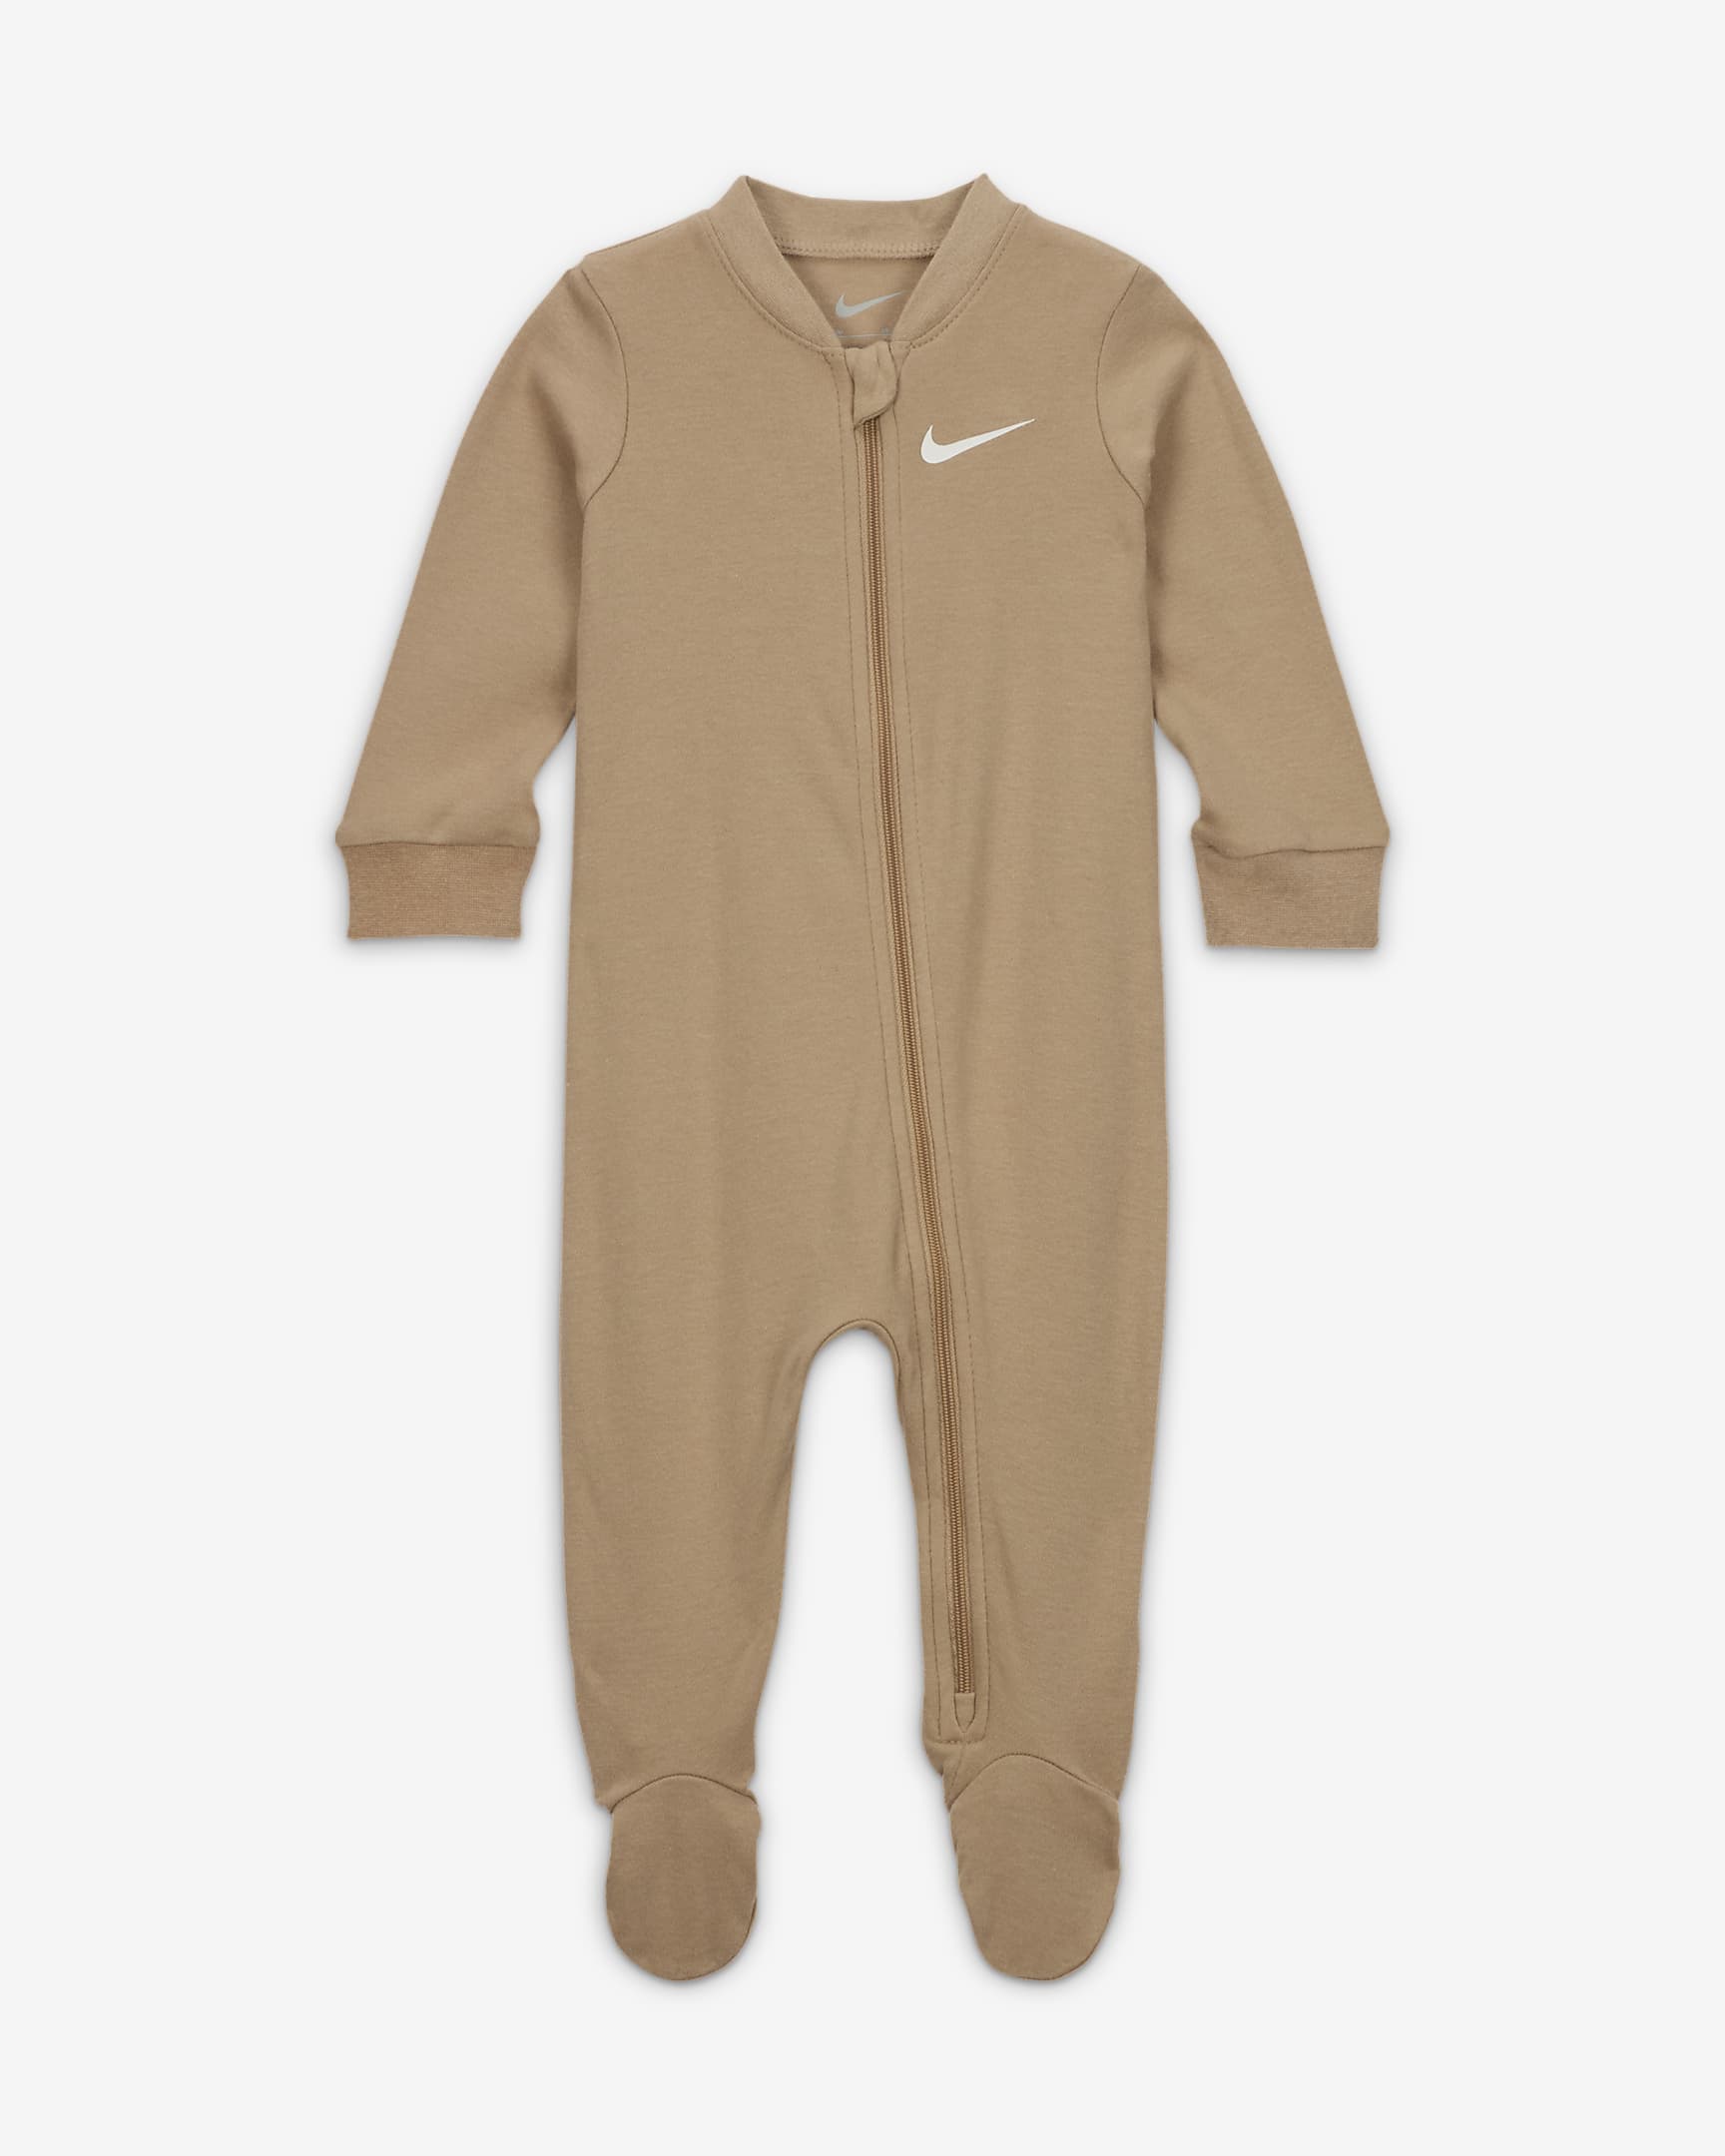 Nike Essentials Footed Coverall Baby Coverall. Nike.com